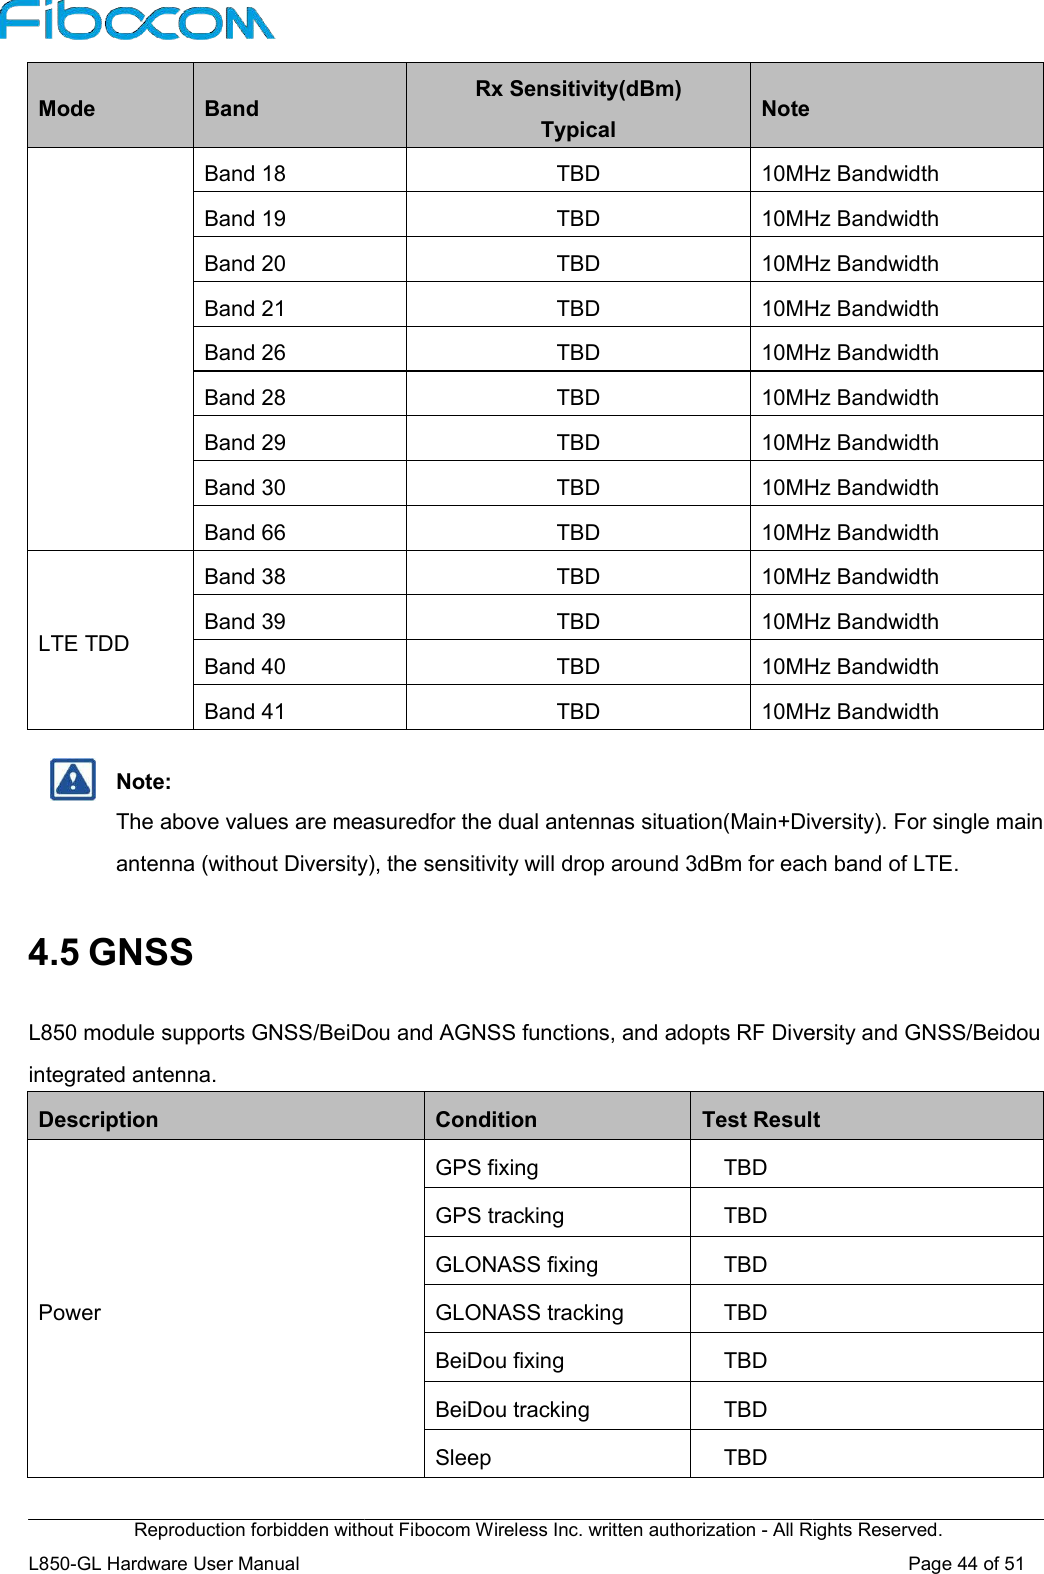 Reproduction forbidden without Fibocom Wireless Inc. written authorization L850-GL Hardware User Manual     Mode  Band  Band 18 Band 19 Band 20 Band 21 Band 26 Band 28 Band 29 Band 30 Band 66    LTE TDD Band 38 Band 39 Band 40 Band 41      Note: The above values are measuredfor the dual antennas situation(Main+Diversity). For single main antenna (without Diversity), the sensitivity will drop around  4.5 GNSS  L850 module supports GNSS/BeiDou and integrated antenna. Description       Power Reproduction forbidden without Fibocom Wireless Inc. written authorization - All Rights Reserved.Rx Sensitivity(dBm) Typical  Note TBD 10MHz BandwidthTBD 10MHz BandwidthTBD 10MHz BandwidthTBD 10MHz BandwidthTBD 10MHz BandwidthTBD 10MHz BandwidthTBD 10MHz BandwidthTBD 10MHz BandwidthTBD 10MHz BandwidthTBD 10MHz BandwidthTBD 10MHz BandwidthTBD 10MHz BandwidthTBD 10MHz BandwidthThe above values are measuredfor the dual antennas situation(Main+Diversity). For single main antenna (without Diversity), the sensitivity will drop around 3dBm for each band of LTE.L850 module supports GNSS/BeiDou and AGNSS functions, and adopts RF Diversity and GNSS/Beidou Condition Test ResultGPS fixing  TBD GPS tracking  TBD GLONASS fixing  TBD GLONASS tracking  TBD BeiDou fixing  TBD BeiDou tracking  TBD Sleep  TBD All Rights Reserved. Page 44 of 51  10MHz Bandwidth 10MHz Bandwidth 10MHz Bandwidth 10MHz Bandwidth 10MHz Bandwidth 10MHz Bandwidth 10MHz Bandwidth 10MHz Bandwidth 10MHz Bandwidth 10MHz Bandwidth 10MHz Bandwidth 10MHz Bandwidth 10MHz Bandwidth The above values are measuredfor the dual antennas situation(Main+Diversity). For single main 3dBm for each band of LTE. AGNSS functions, and adopts RF Diversity and GNSS/Beidou Test Result 